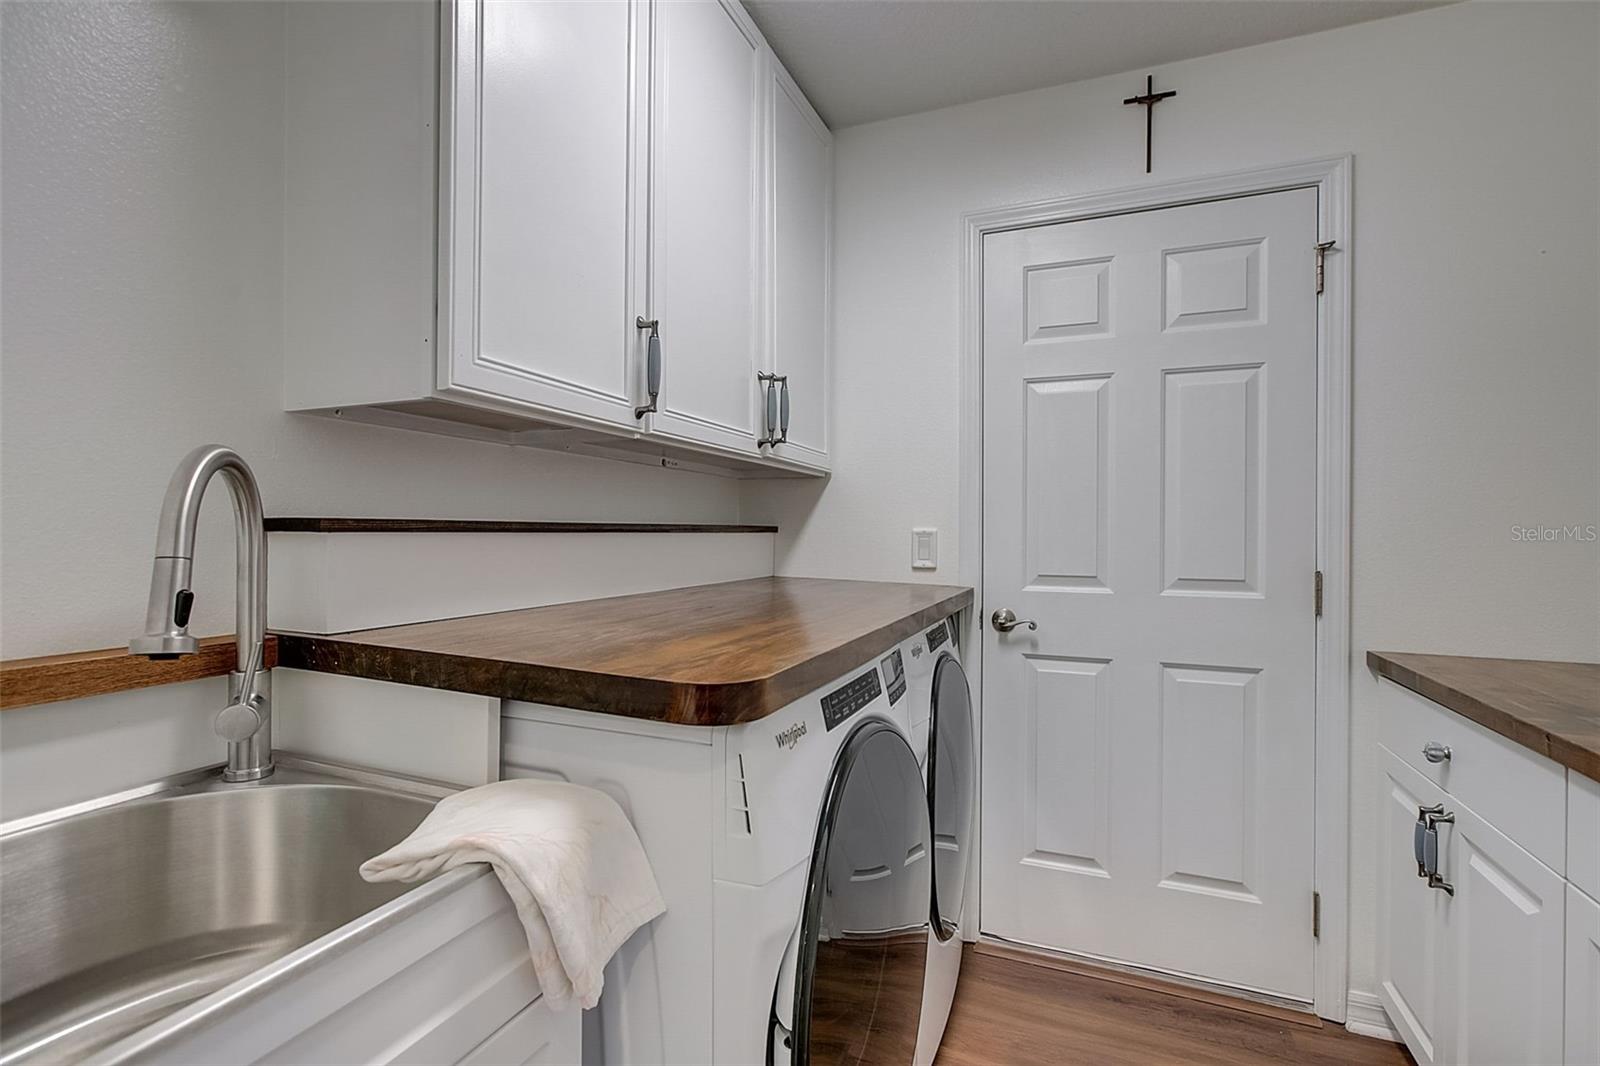 Laundry room with utility sink, built-in shelving, and cabinets with butcher block counters